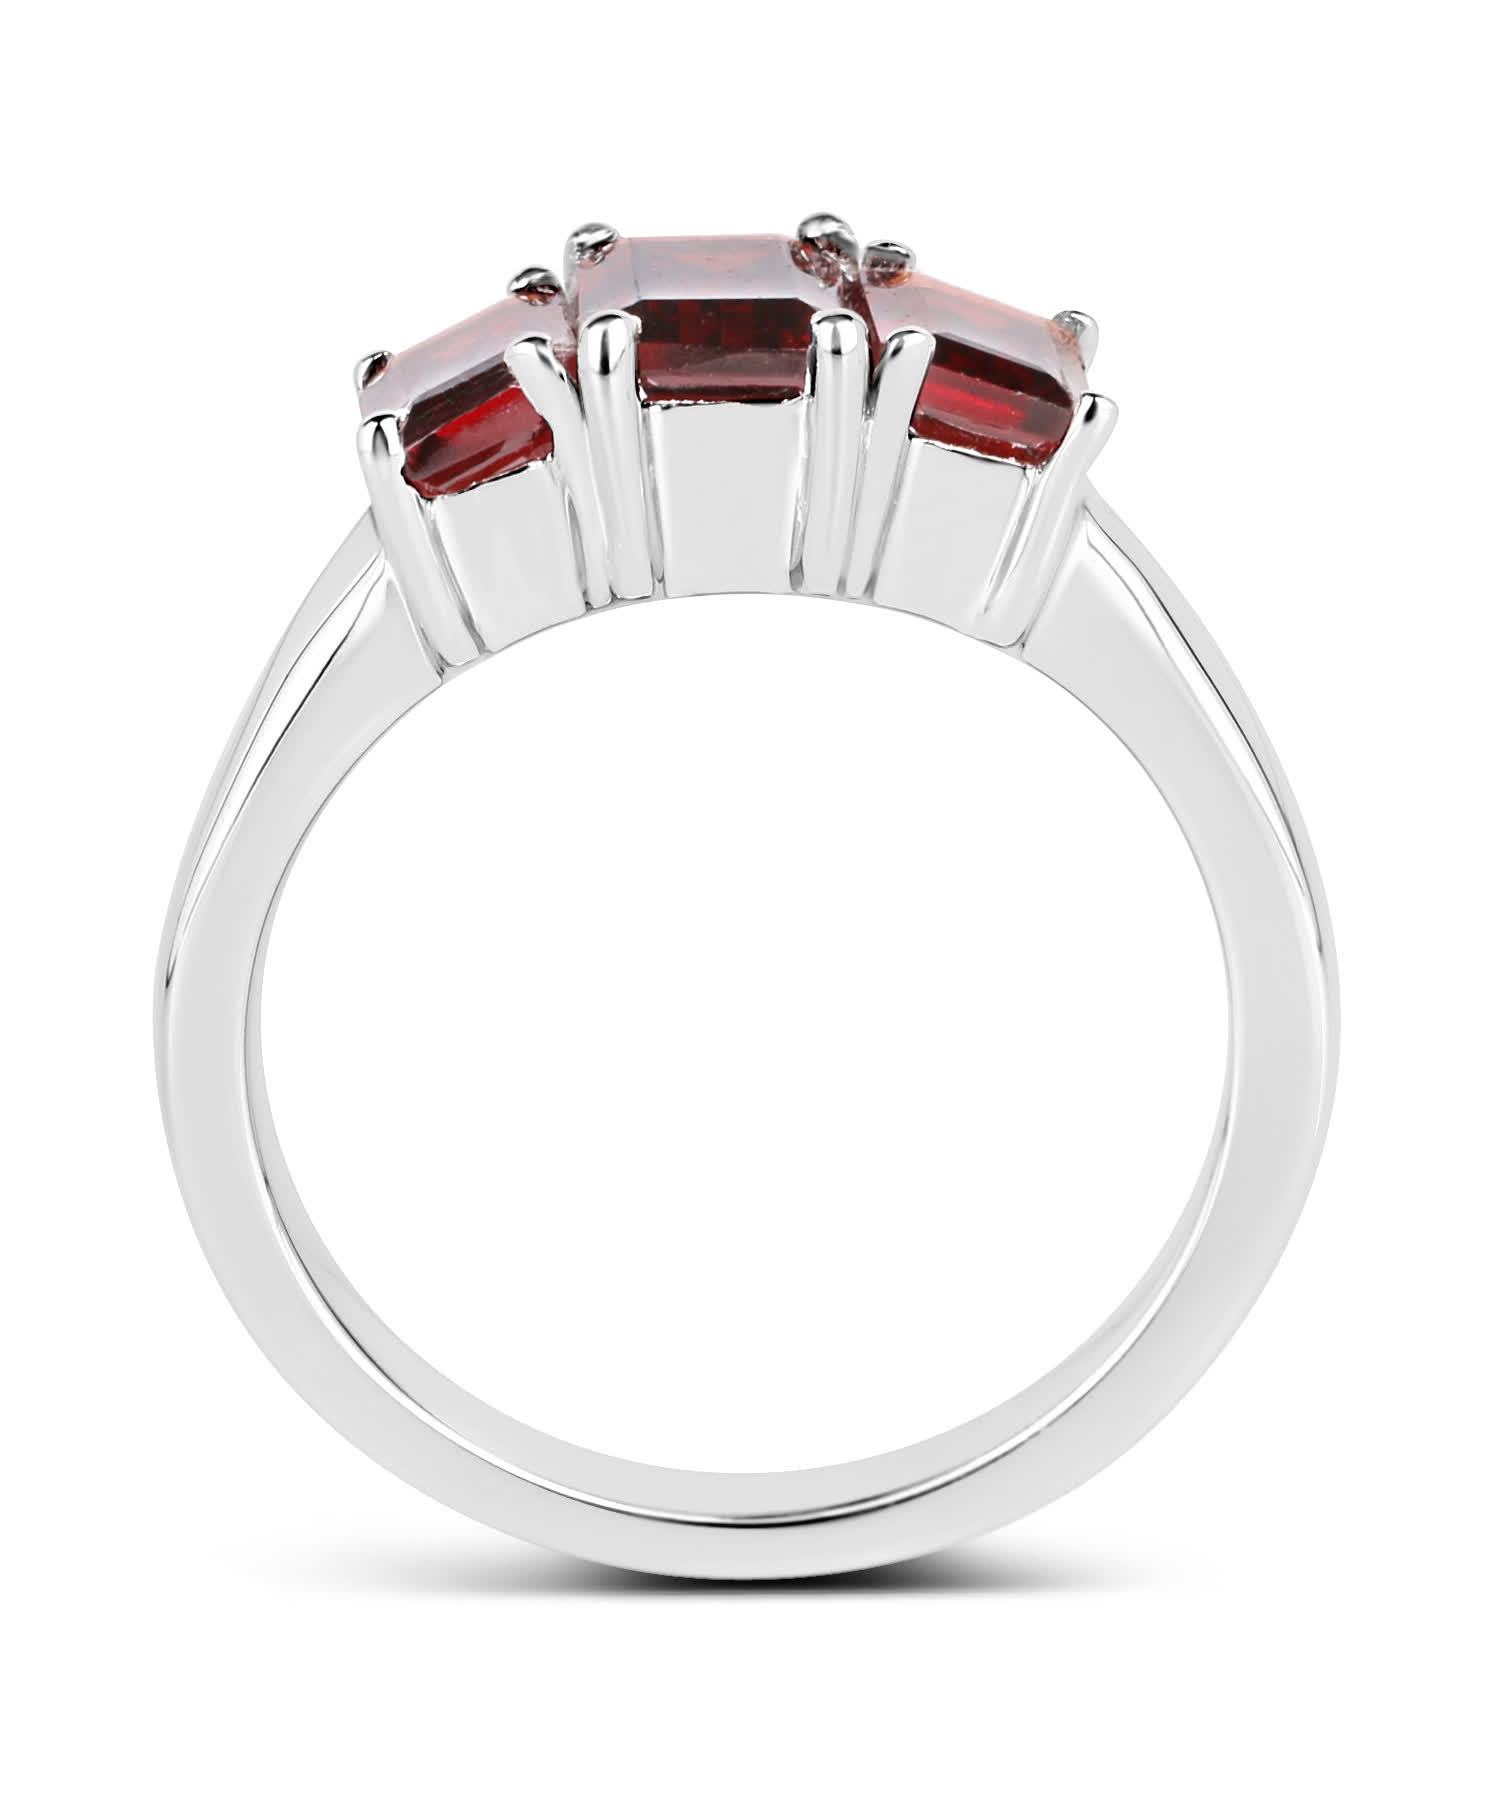 2.80ctw Natural Garnet Rhodium Plated 925 Sterling Silver Three-Stone Ring View 2